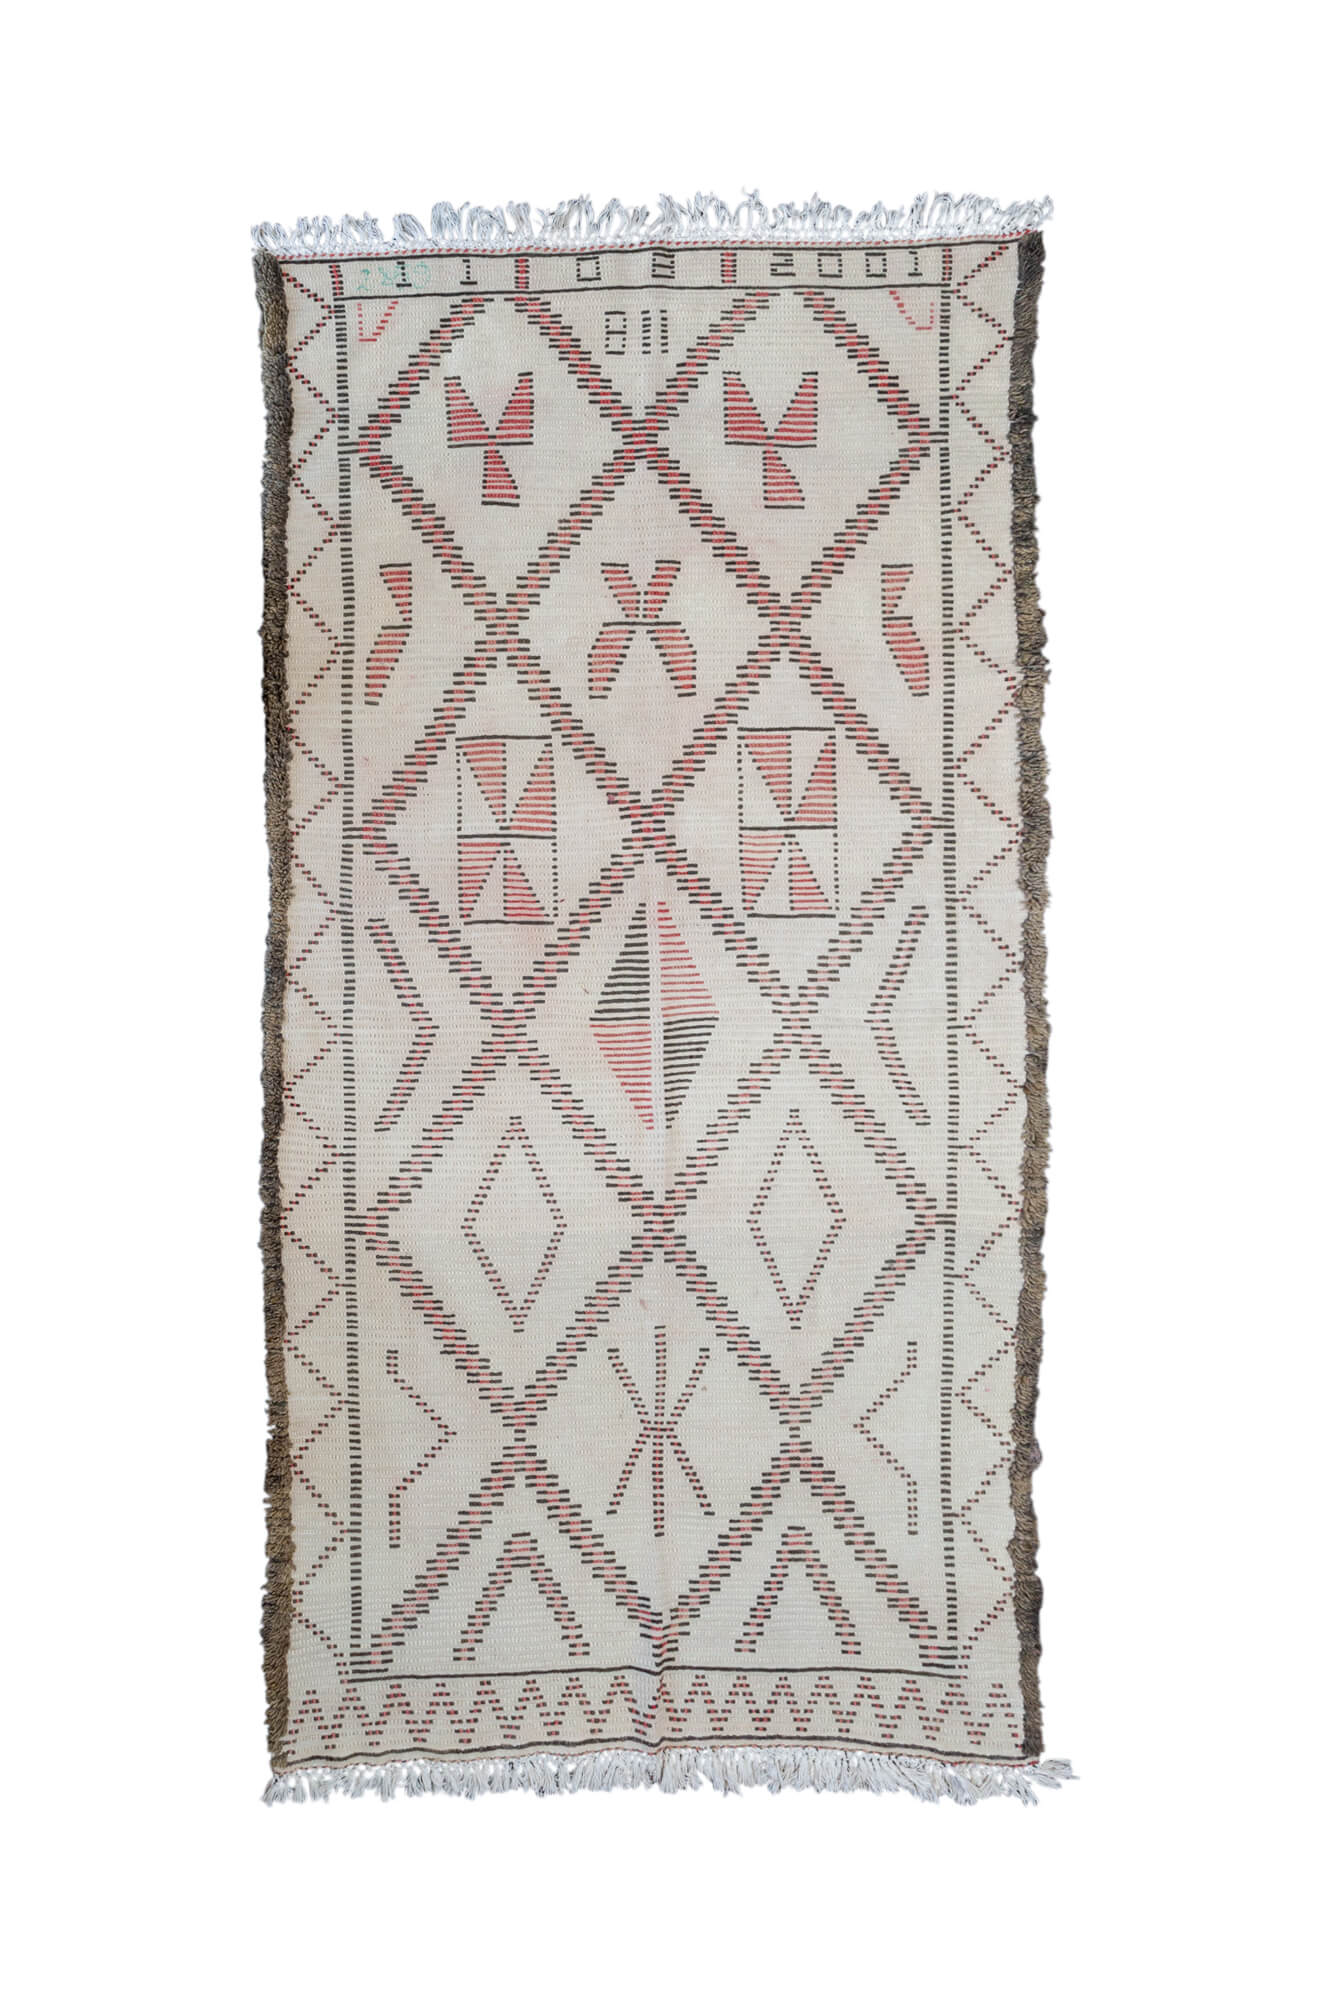 back of Natural White, Brown & Rose Marmoucha Moroccan Rug showing date it was made